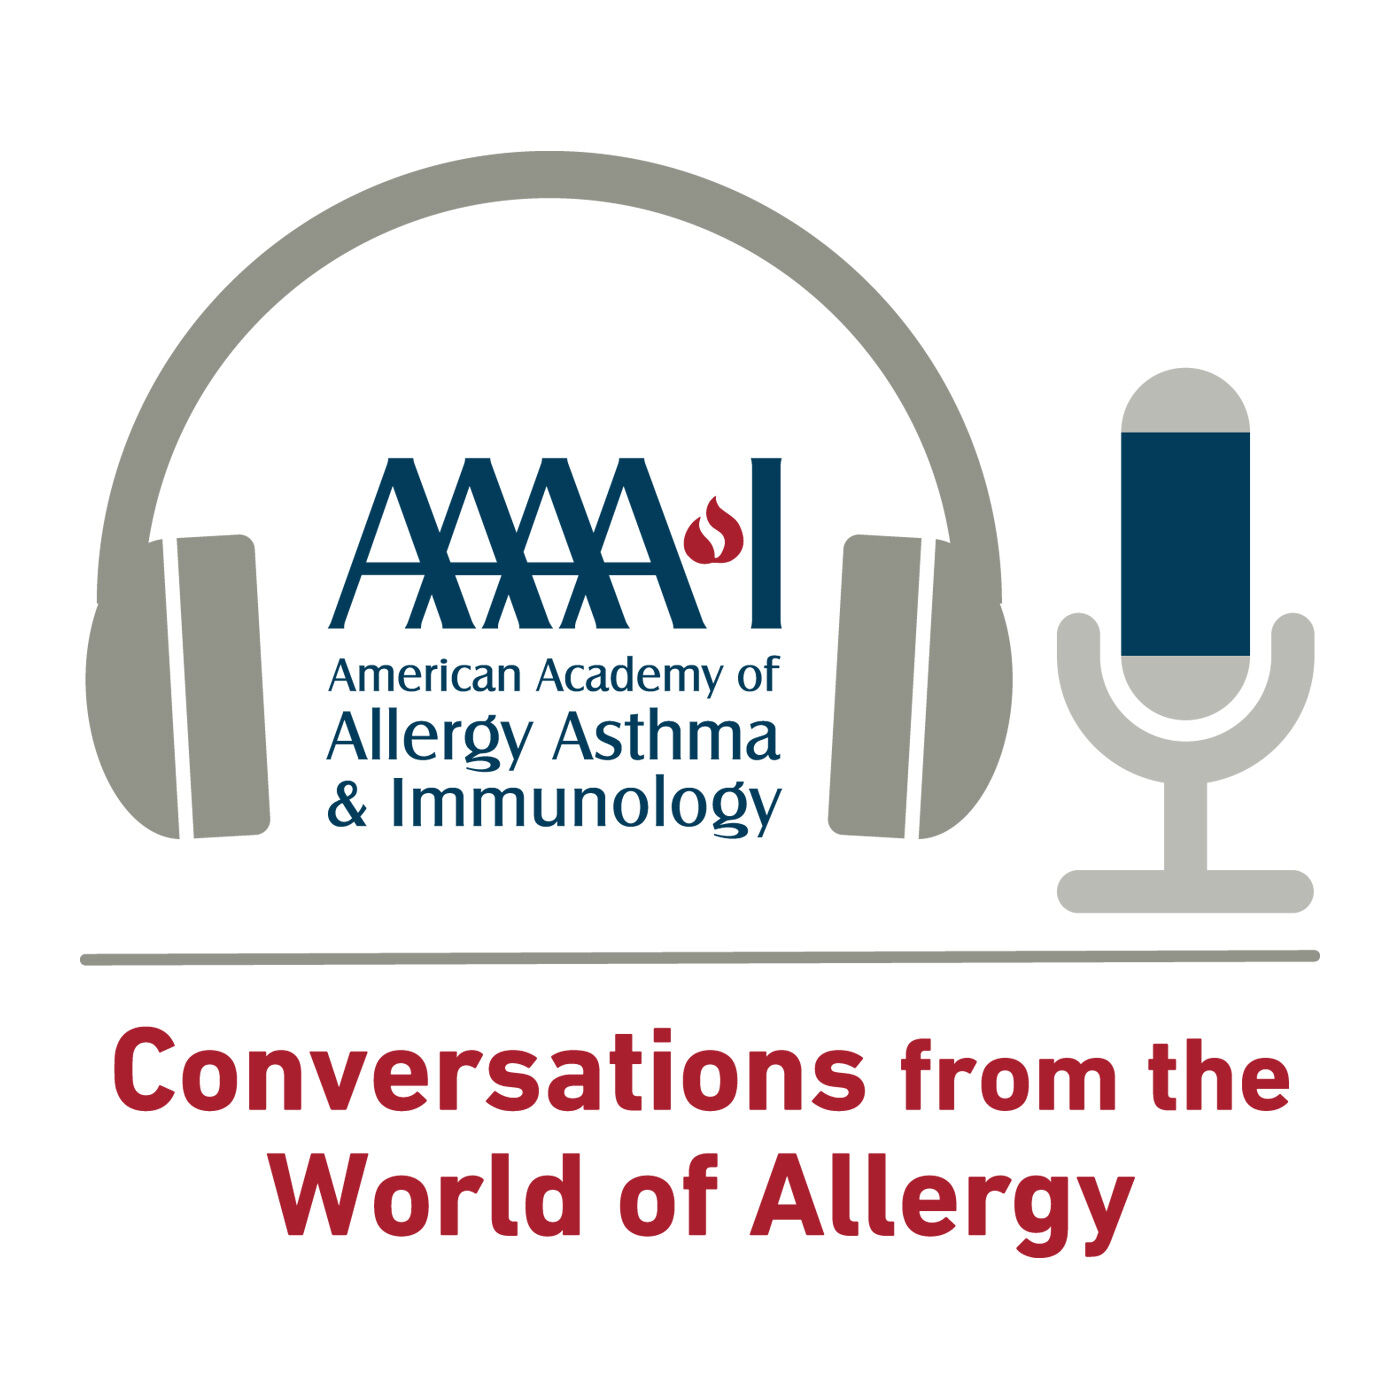 2022 Drug Allergy Practice Parameters: What’s New and Different